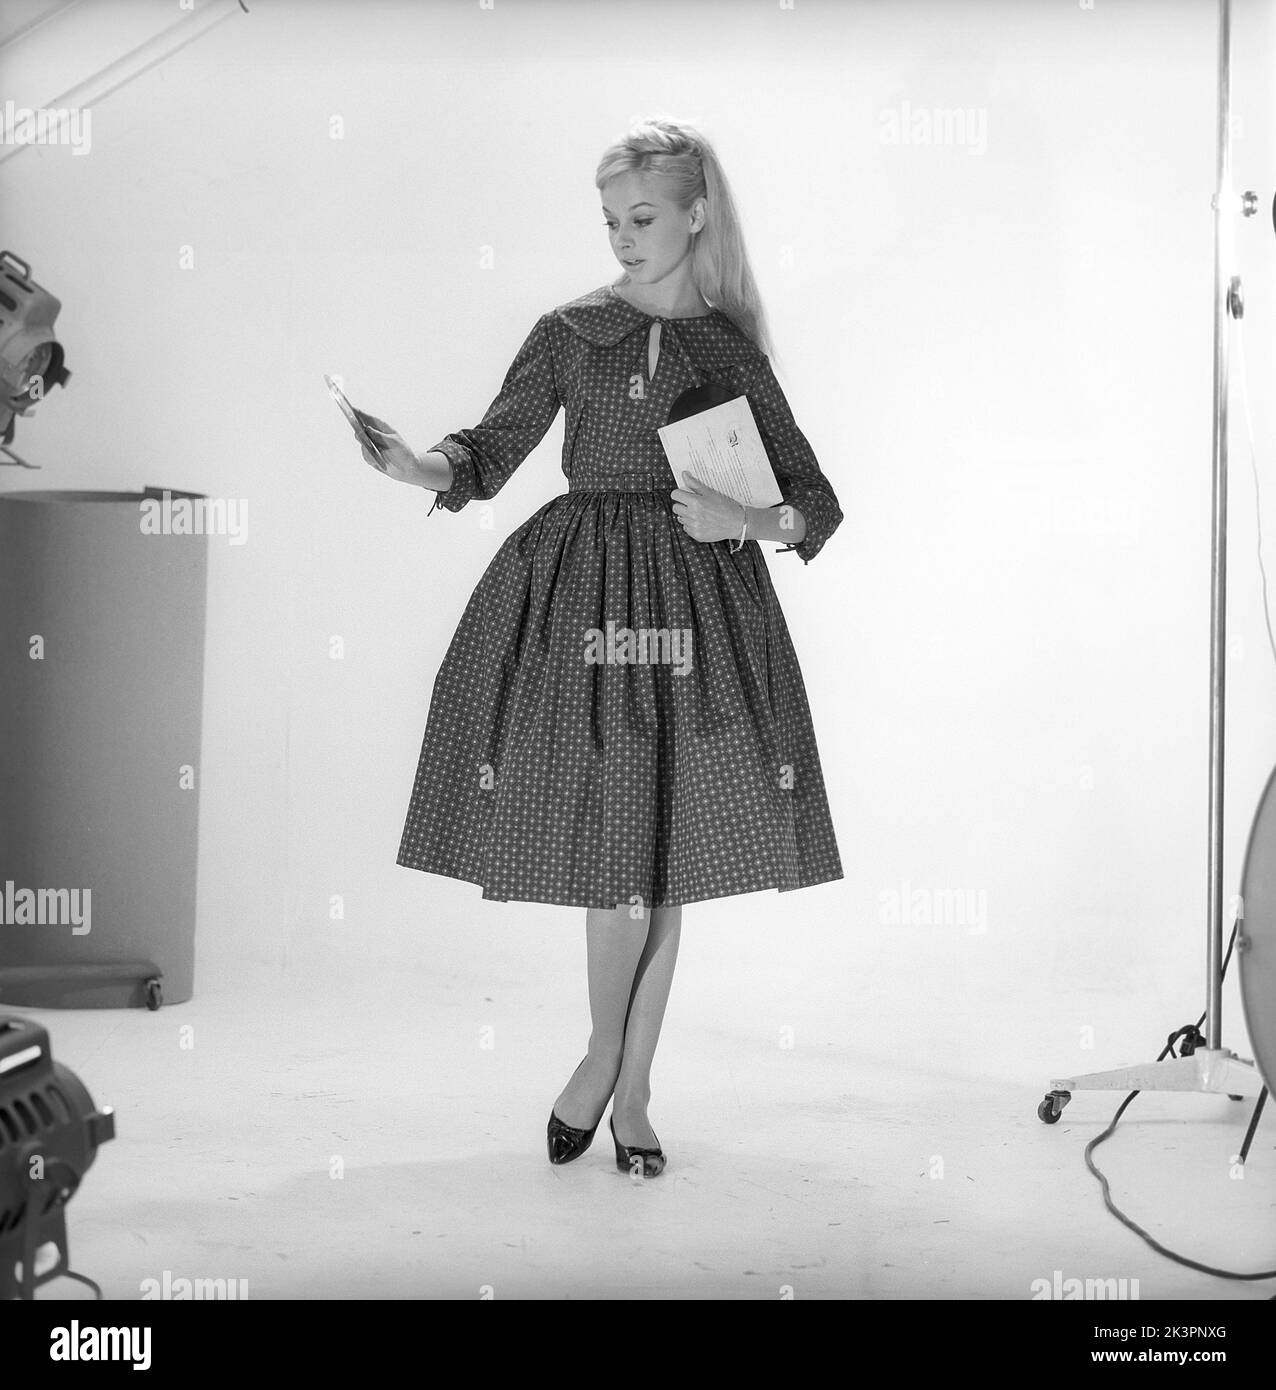 1950s fashion. A young woman in a typical 1950s dress. A wide skirt dress with a 50s patterened fabric.  Sweden 1959. Kristoffersson ref CO93-2 Stock Photo